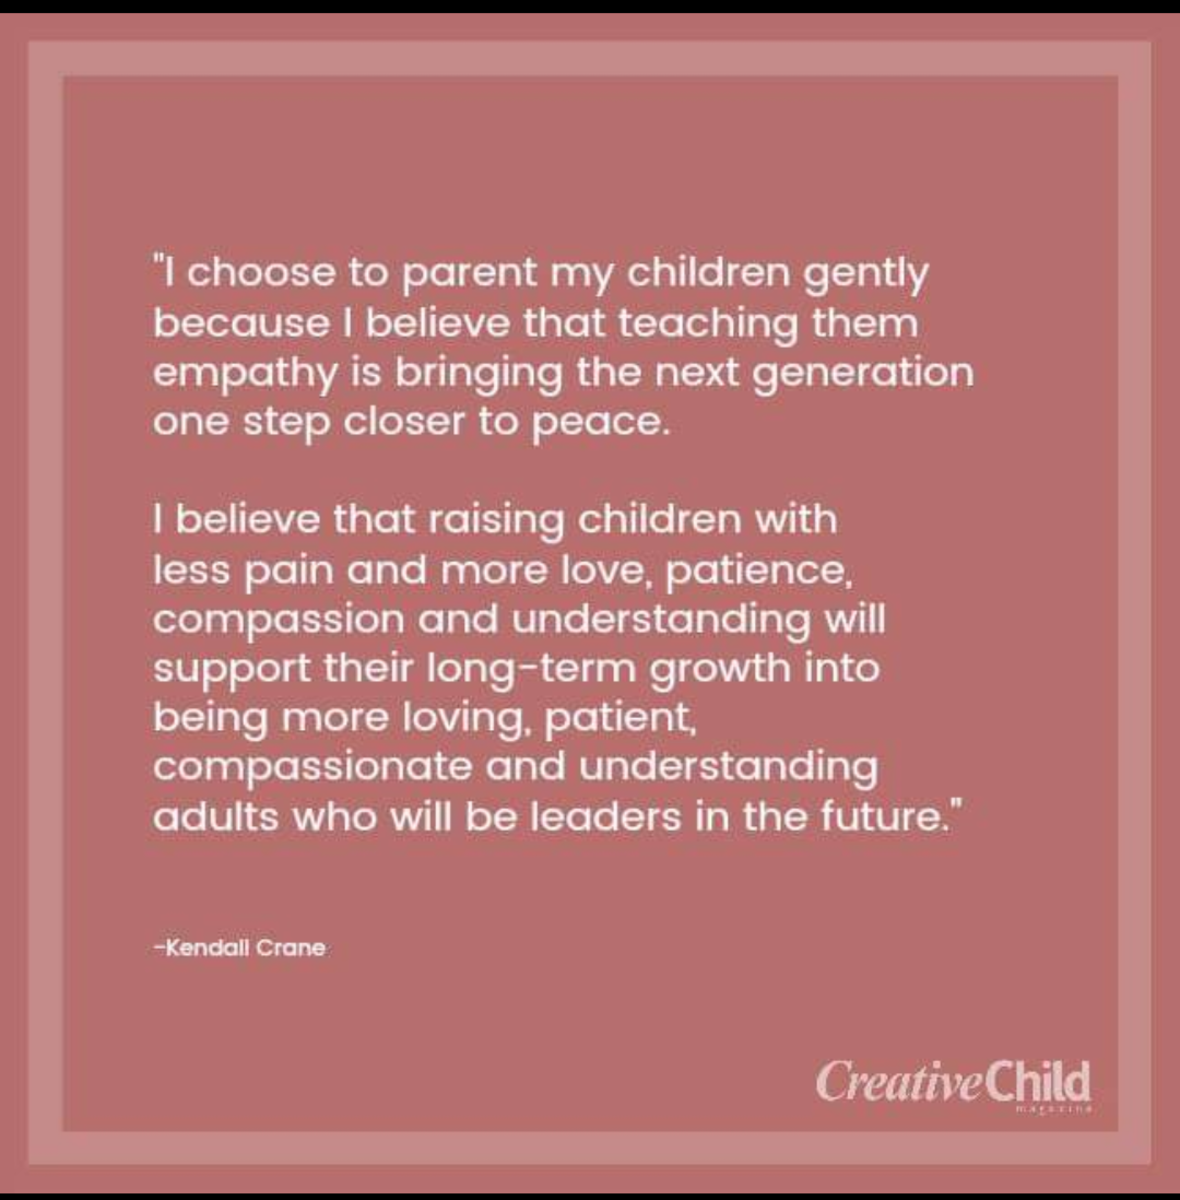 A quote about gentle parenting.